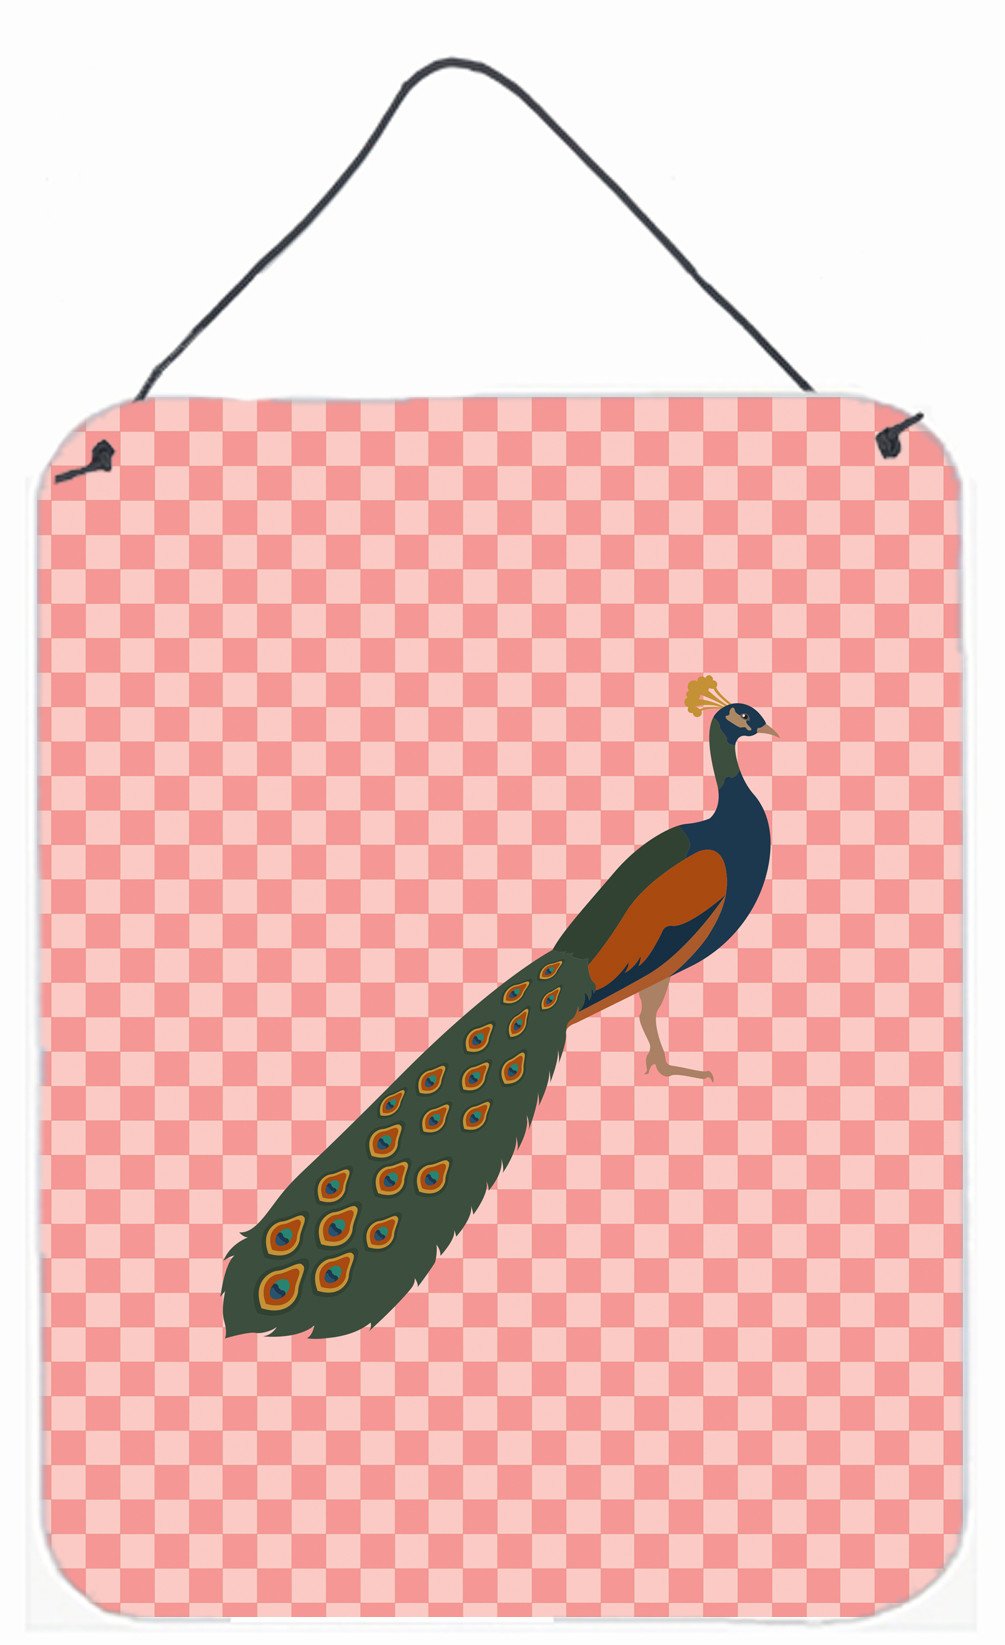 Indian Peacock Peafowl Pink Check Wall or Door Hanging Prints BB7925DS1216 by Caroline's Treasures